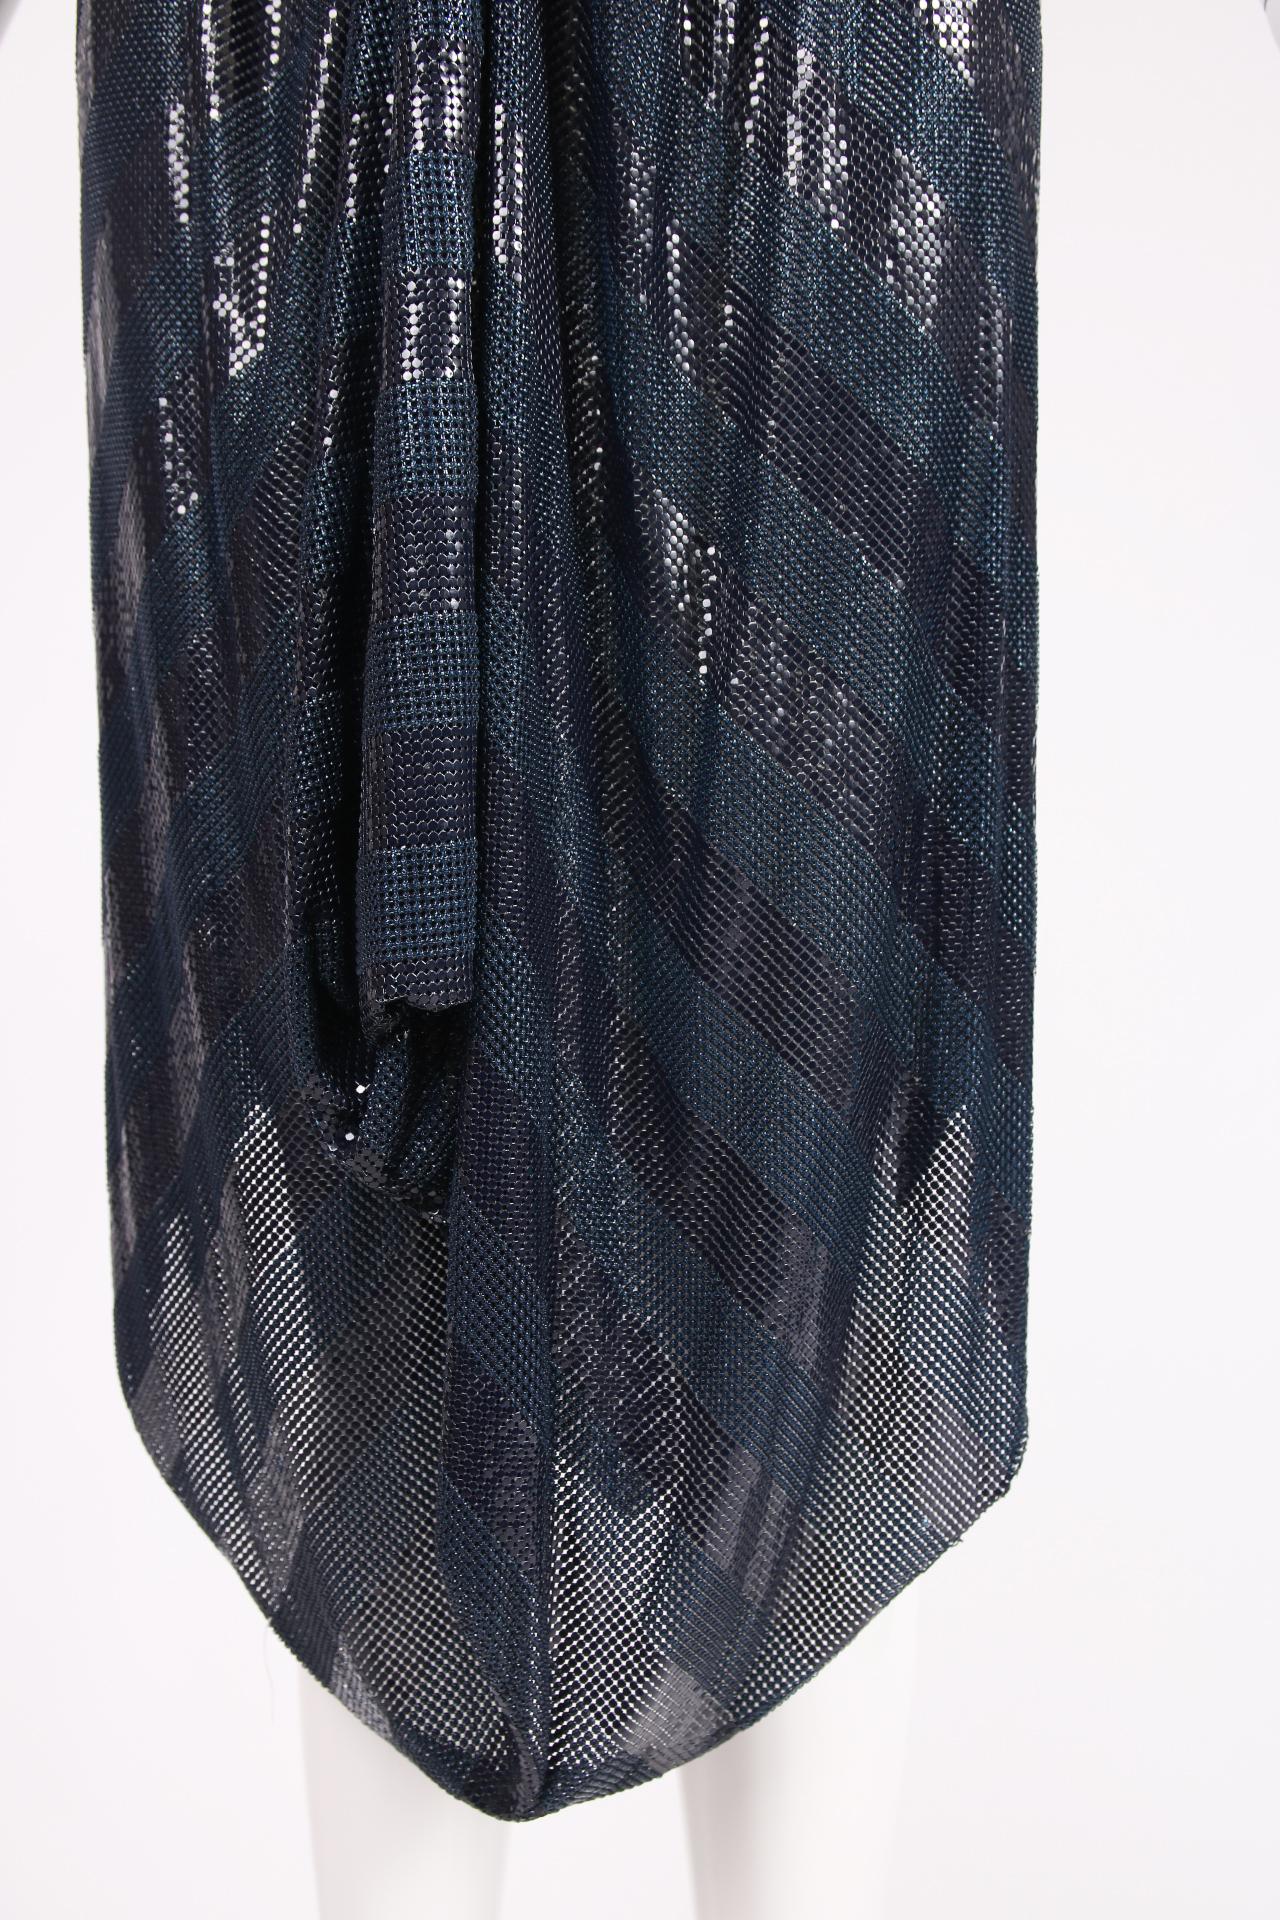 Women's Vintage Gianni Versace Navy Striped Oroton Metal Mesh Chainmail Dress Ca. 1983 For Sale